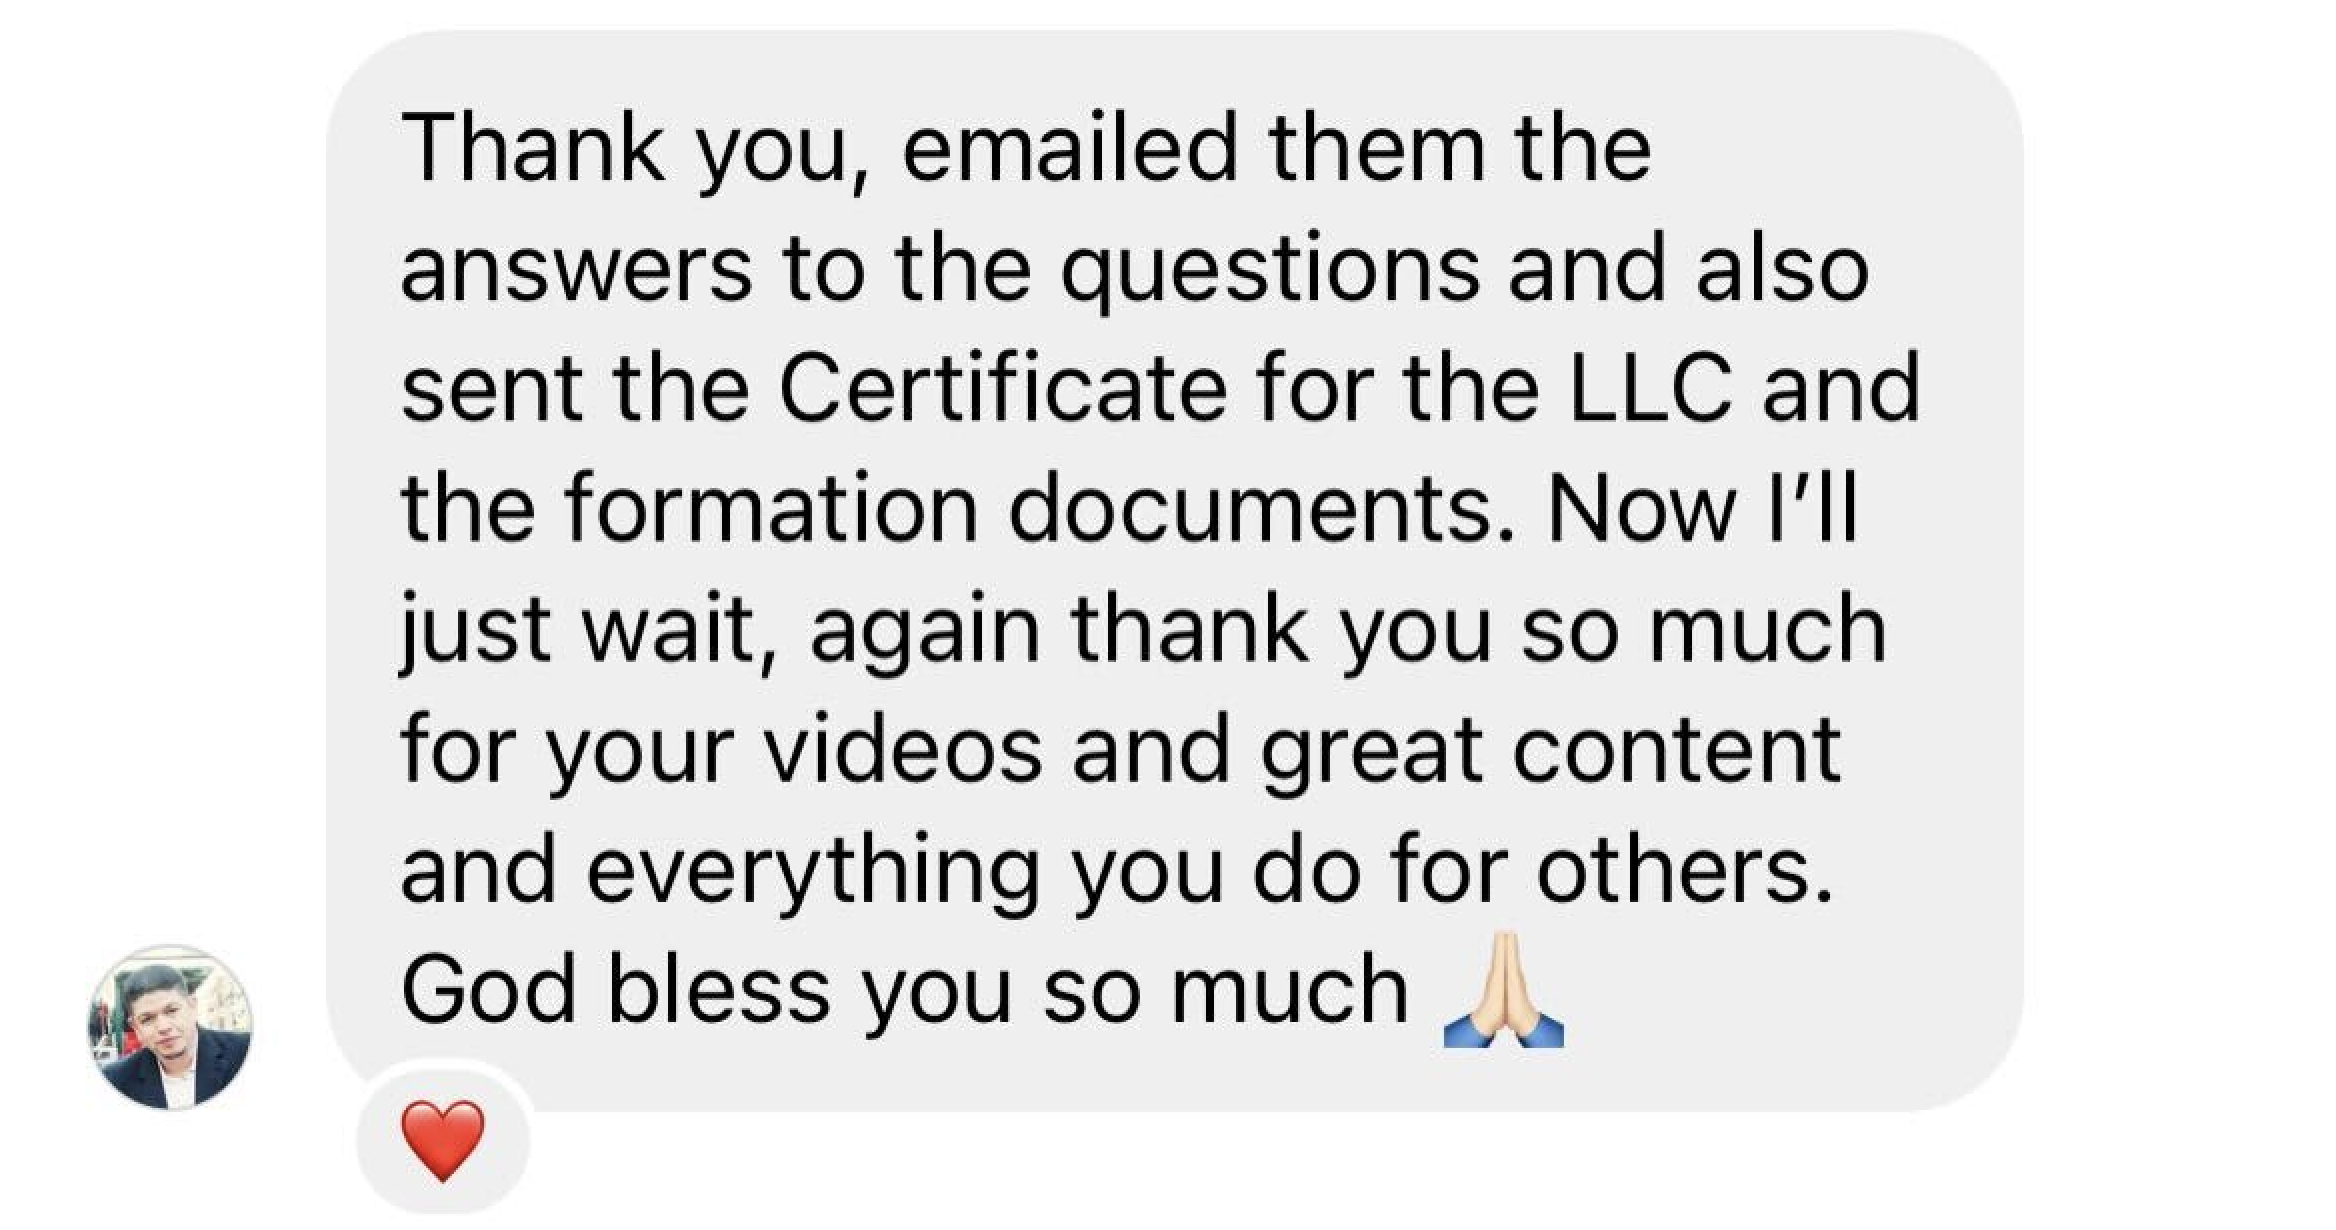 A text message that says thank you for sending the answers to the questions and also sent the certificate for the llc.